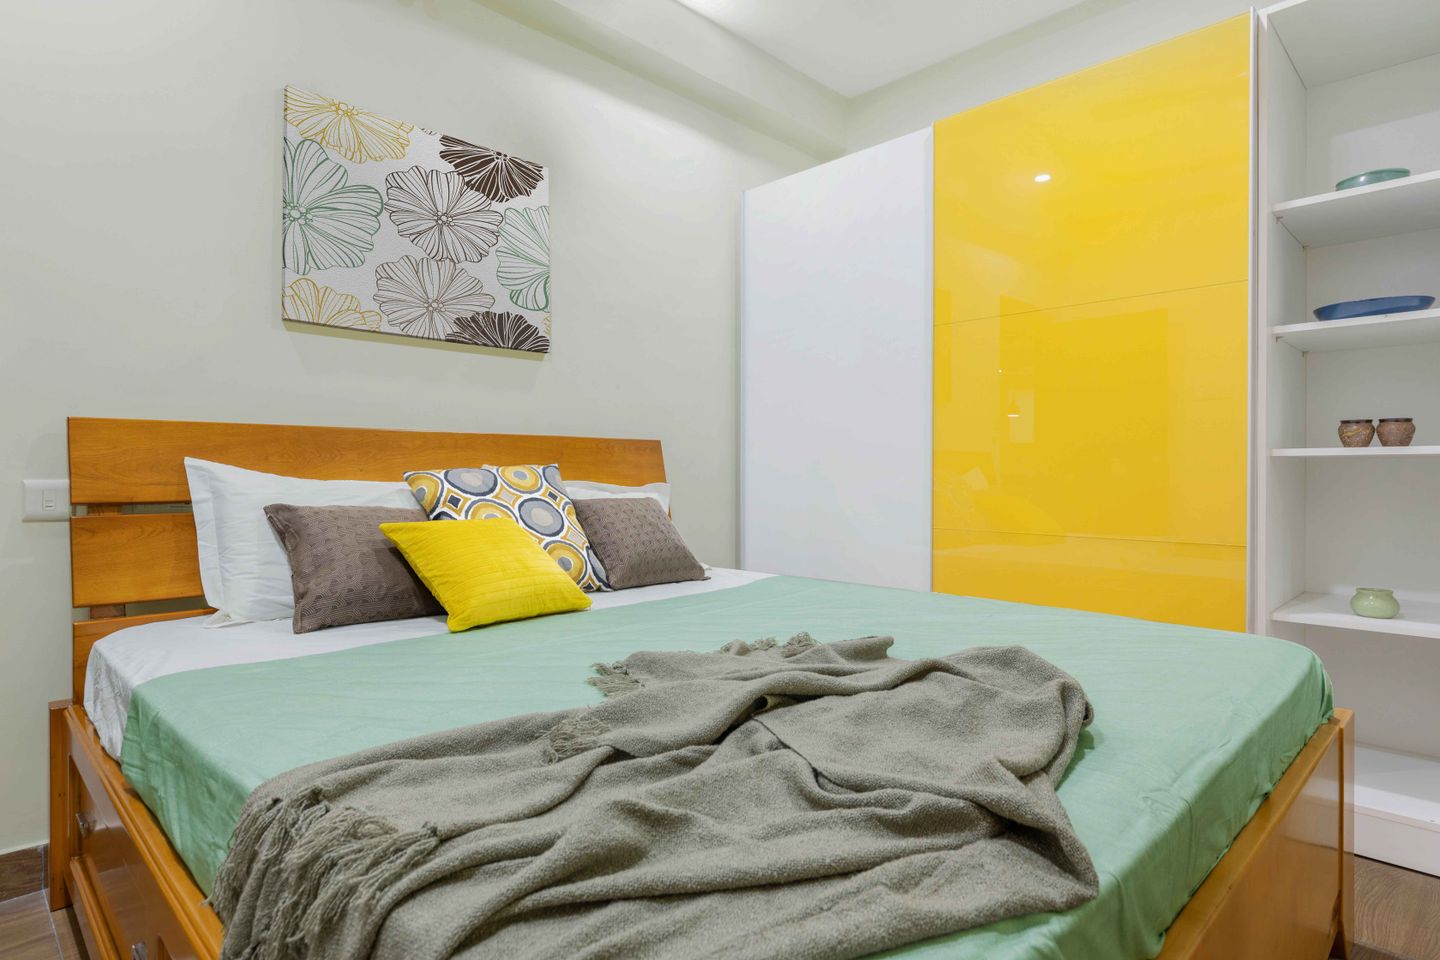 Modern Guest Room With Wooden Bed, Yellow And White Sliding Wardrobe And White Wall Paint - Livspace